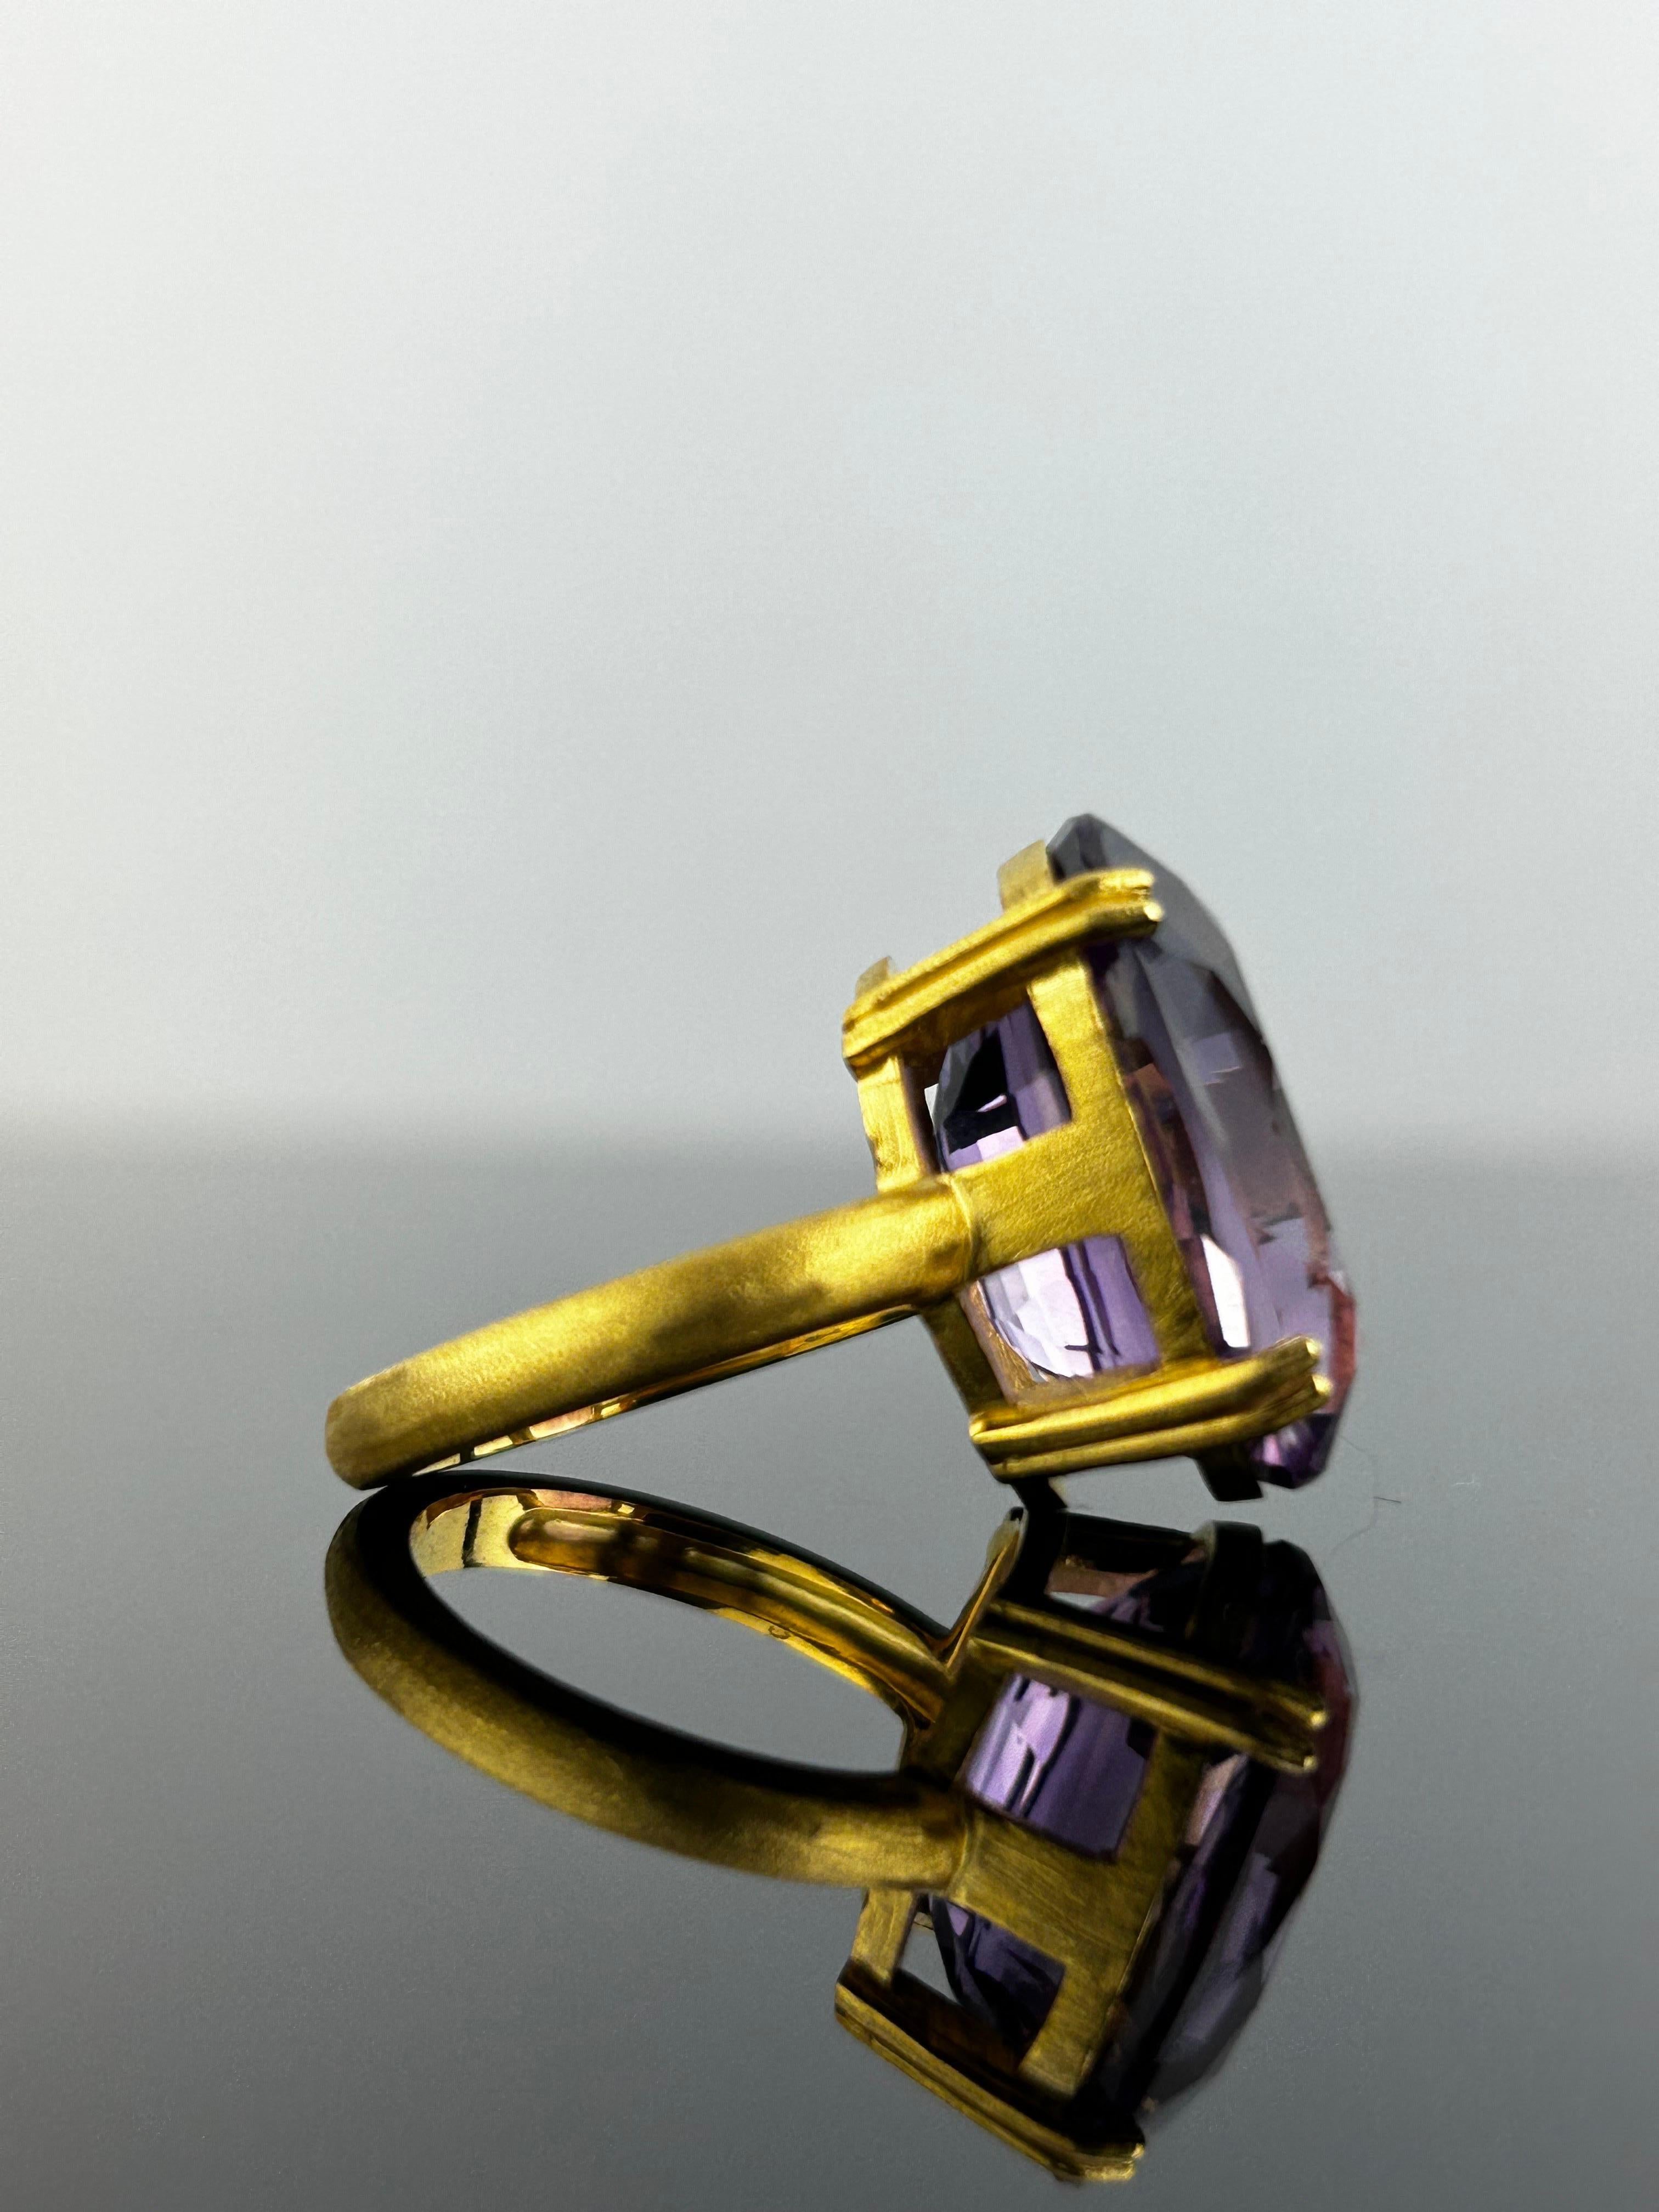 Make a statement with this stunning 17.95 carat purple Amethyst solitaire cocktail ring. The center stone is completely clean, with no inclusions at all, a beautiful purple color and great luster. The stone is set in solid 18K yellow gold, matte